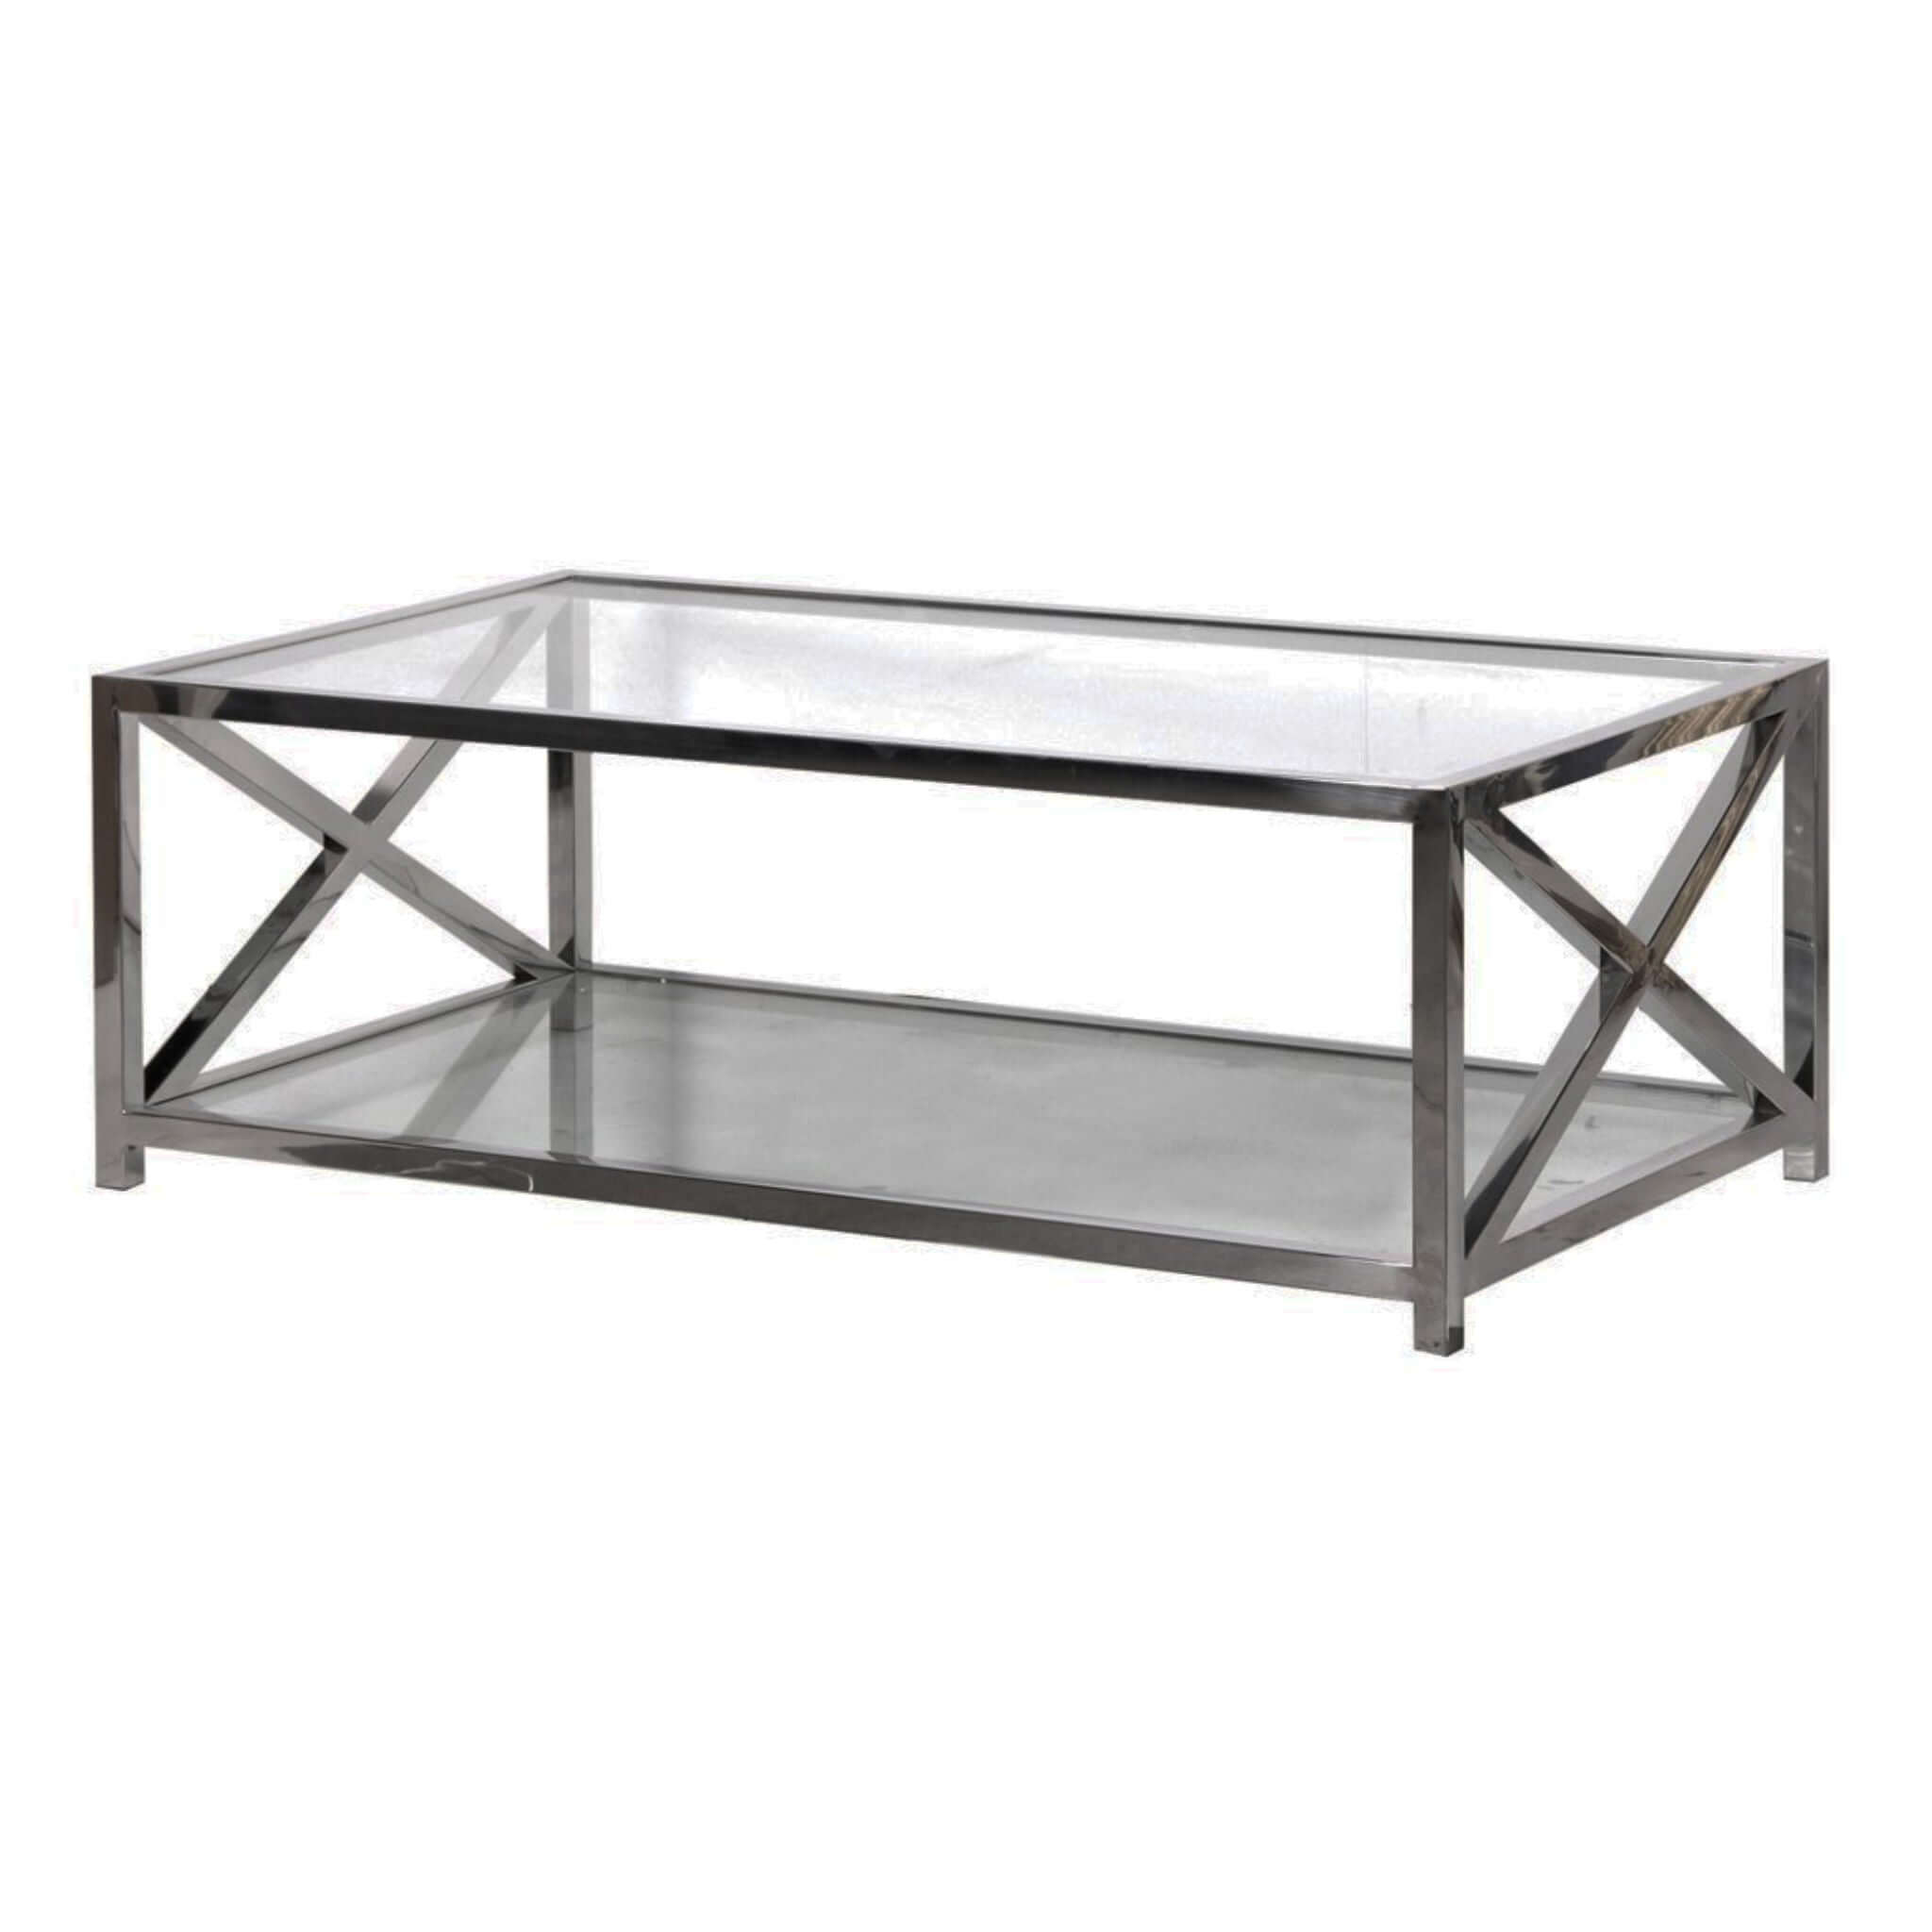 Escapology Lyon Polished Stainless Steel Coffee Table - escapologyhome.co.uk